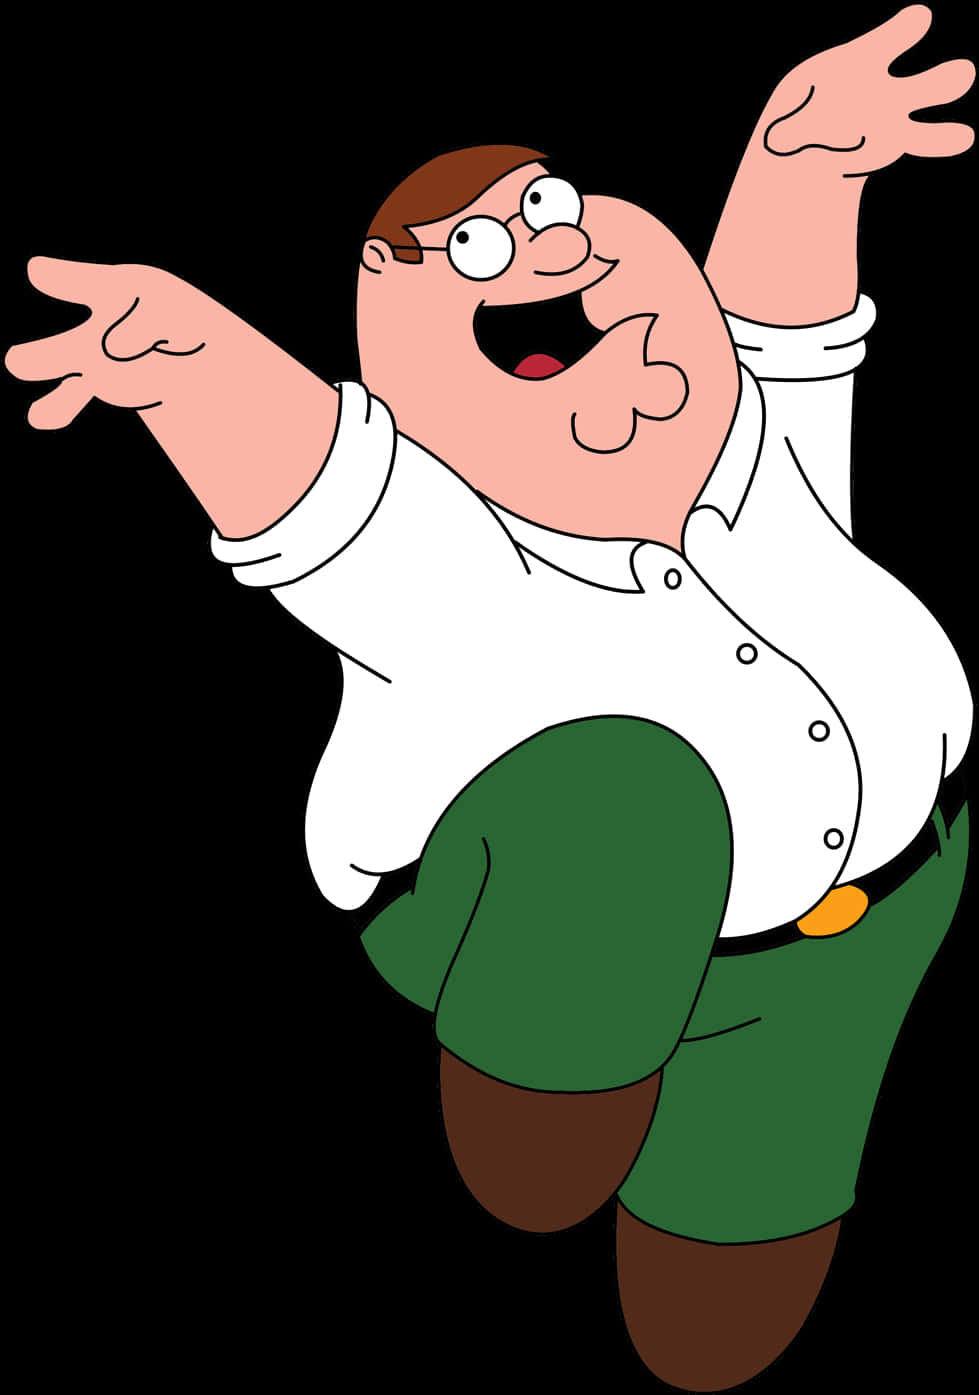 A Cartoon Of A Man With Arms Outstretched